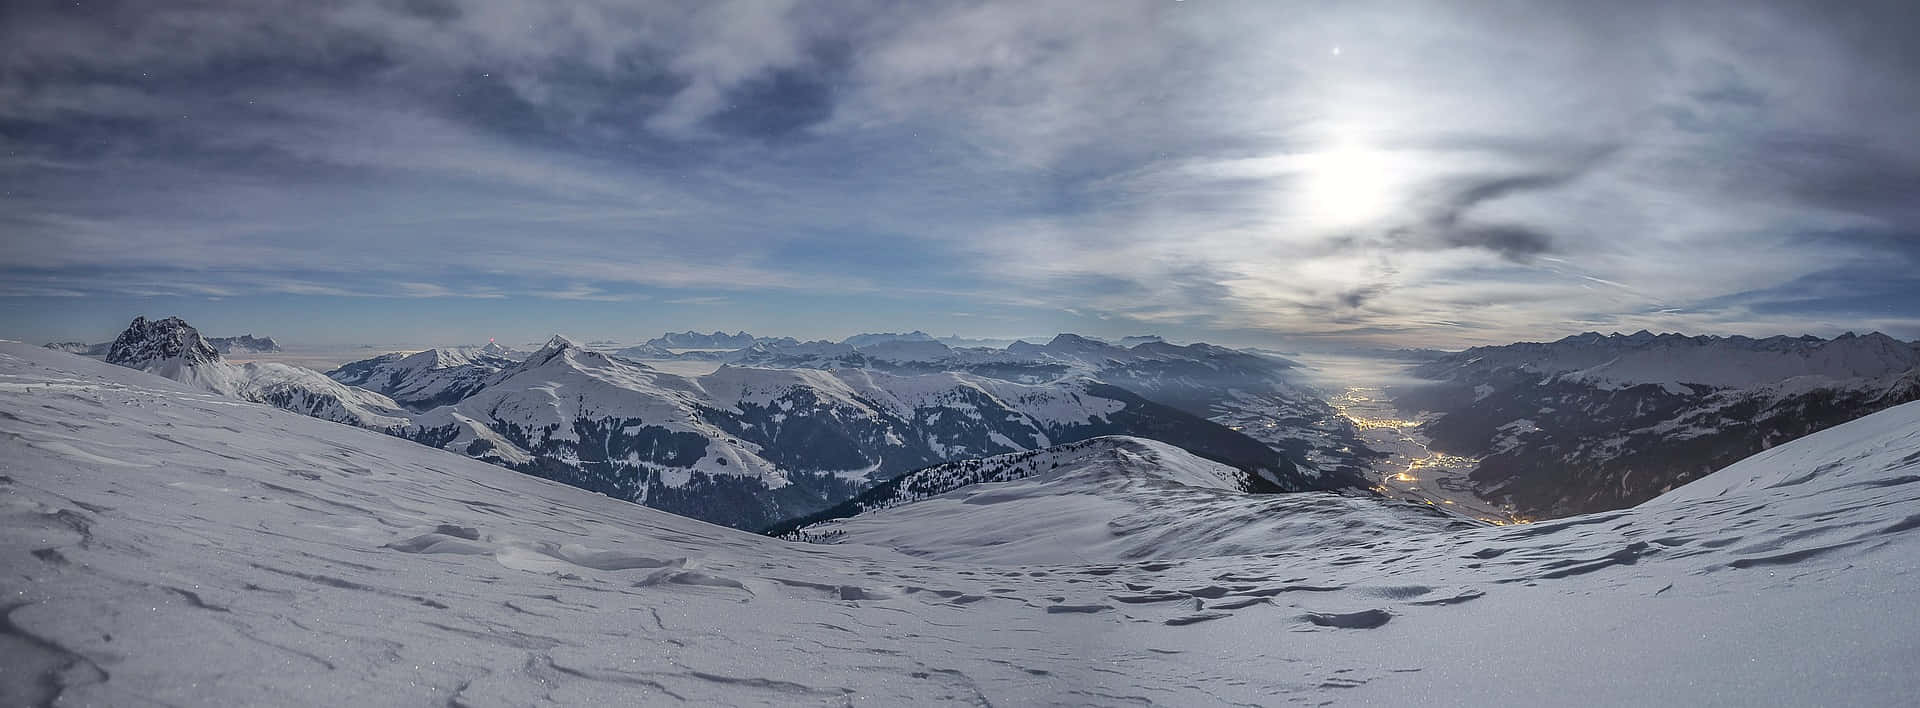 Snowy Mountain View Panoramic Picture